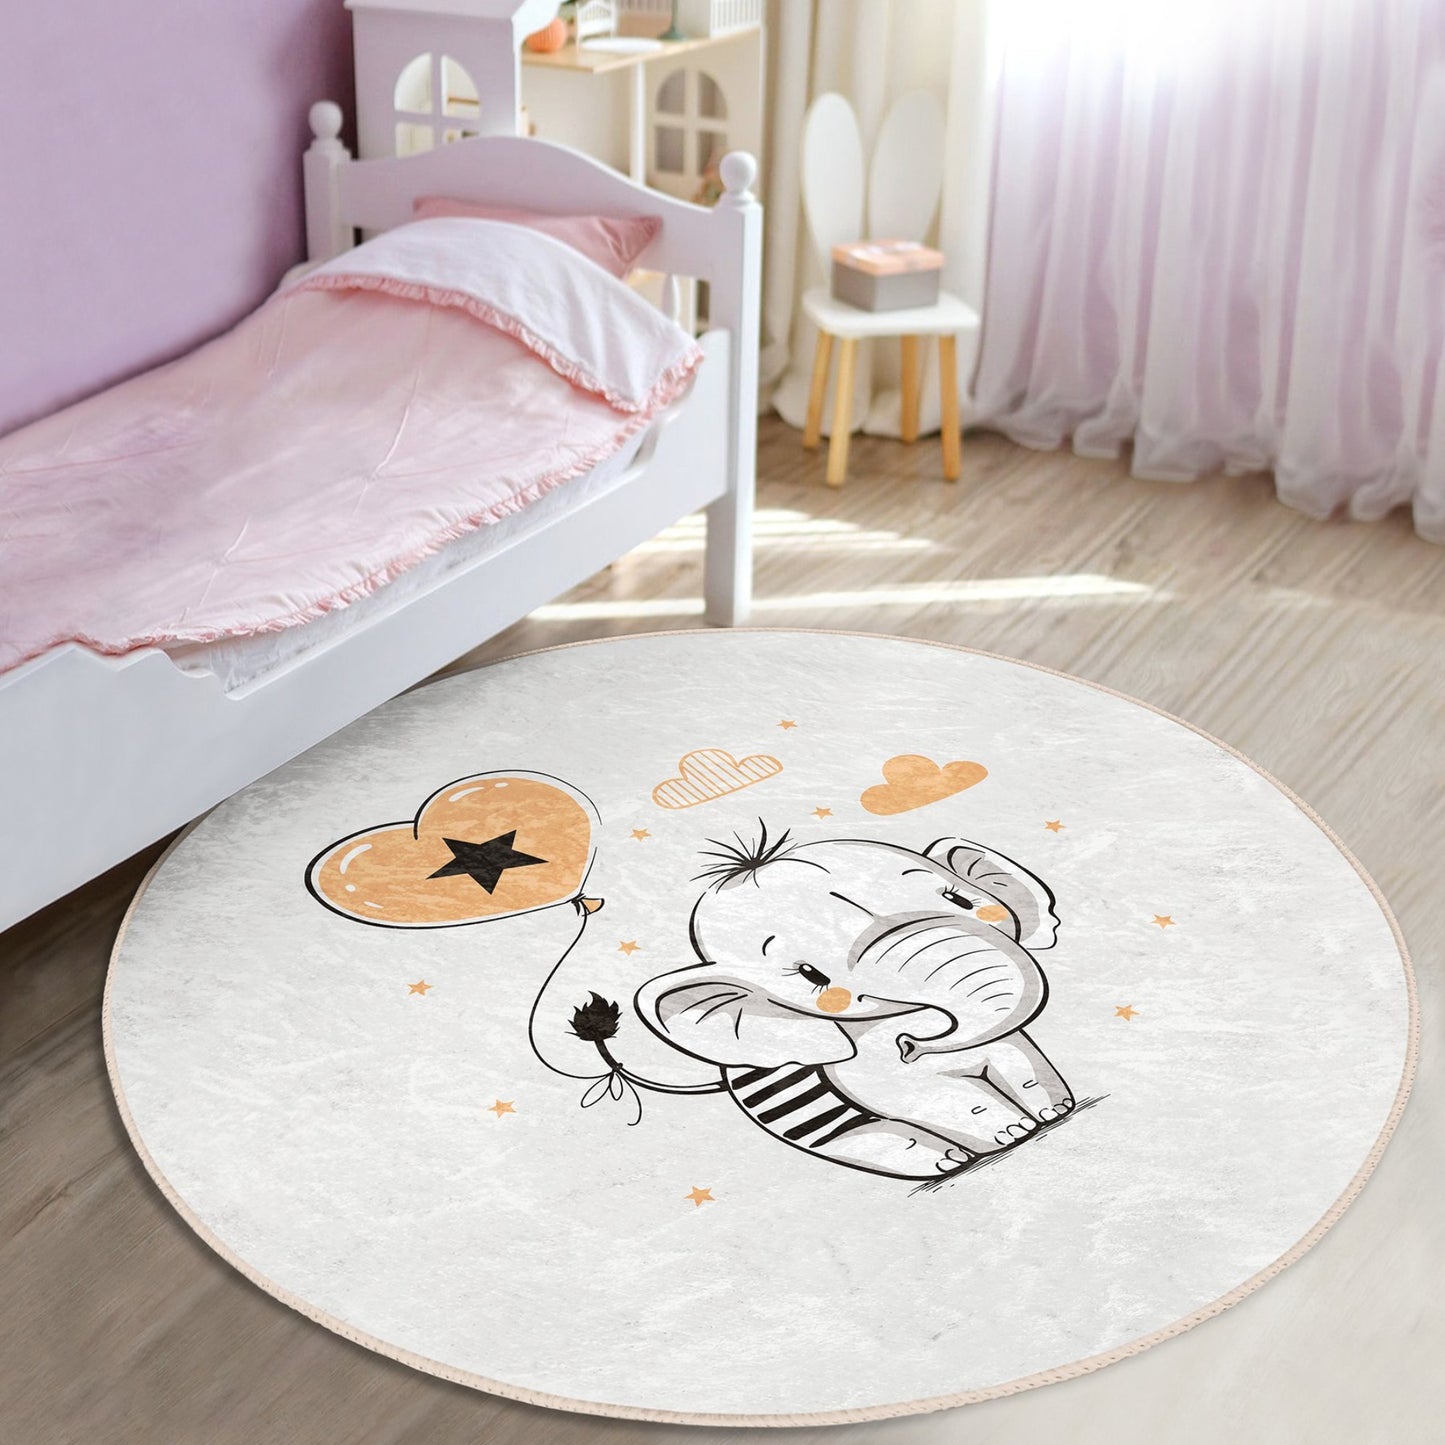 Durable Rug with Cute Baby Elephant Design